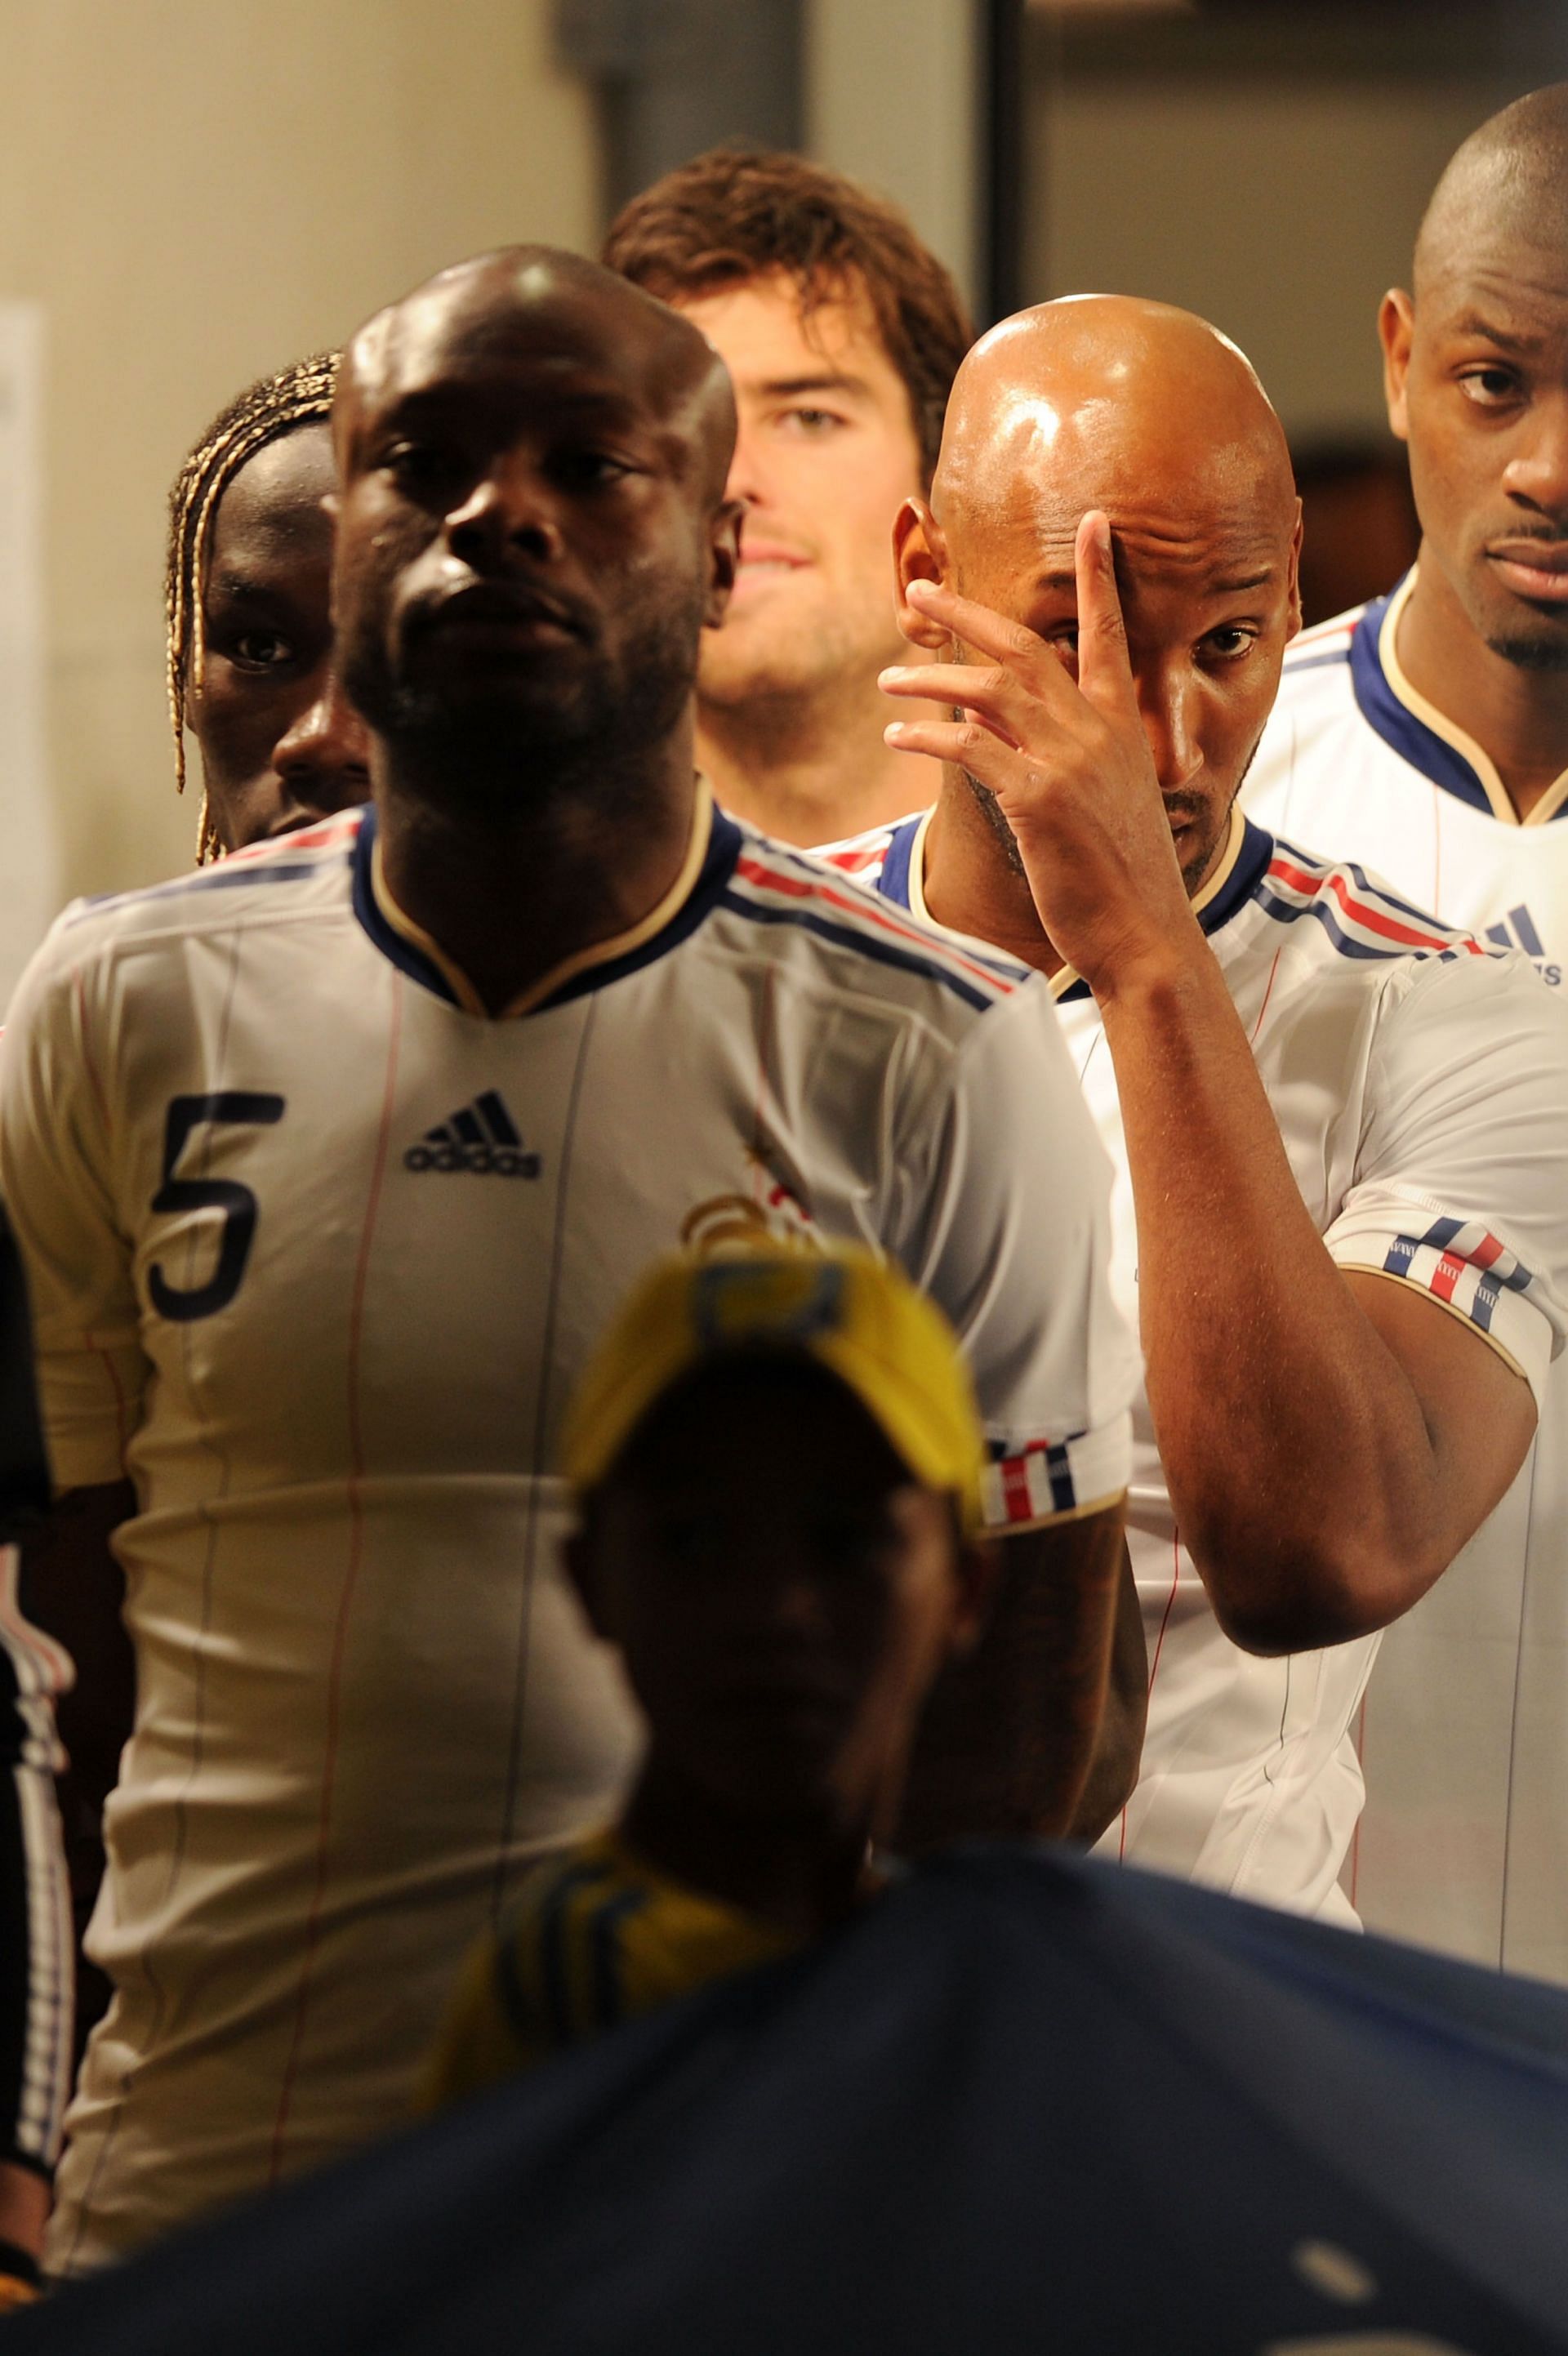 William Gallas and Nicolas Anelka of France prepare to walk onto the pitch during the 2010 FIFA World Cup South Africa Group A match between Uruguay and France at Green Point Stadium on June 11, 2010, in Cape Town, South Africa.